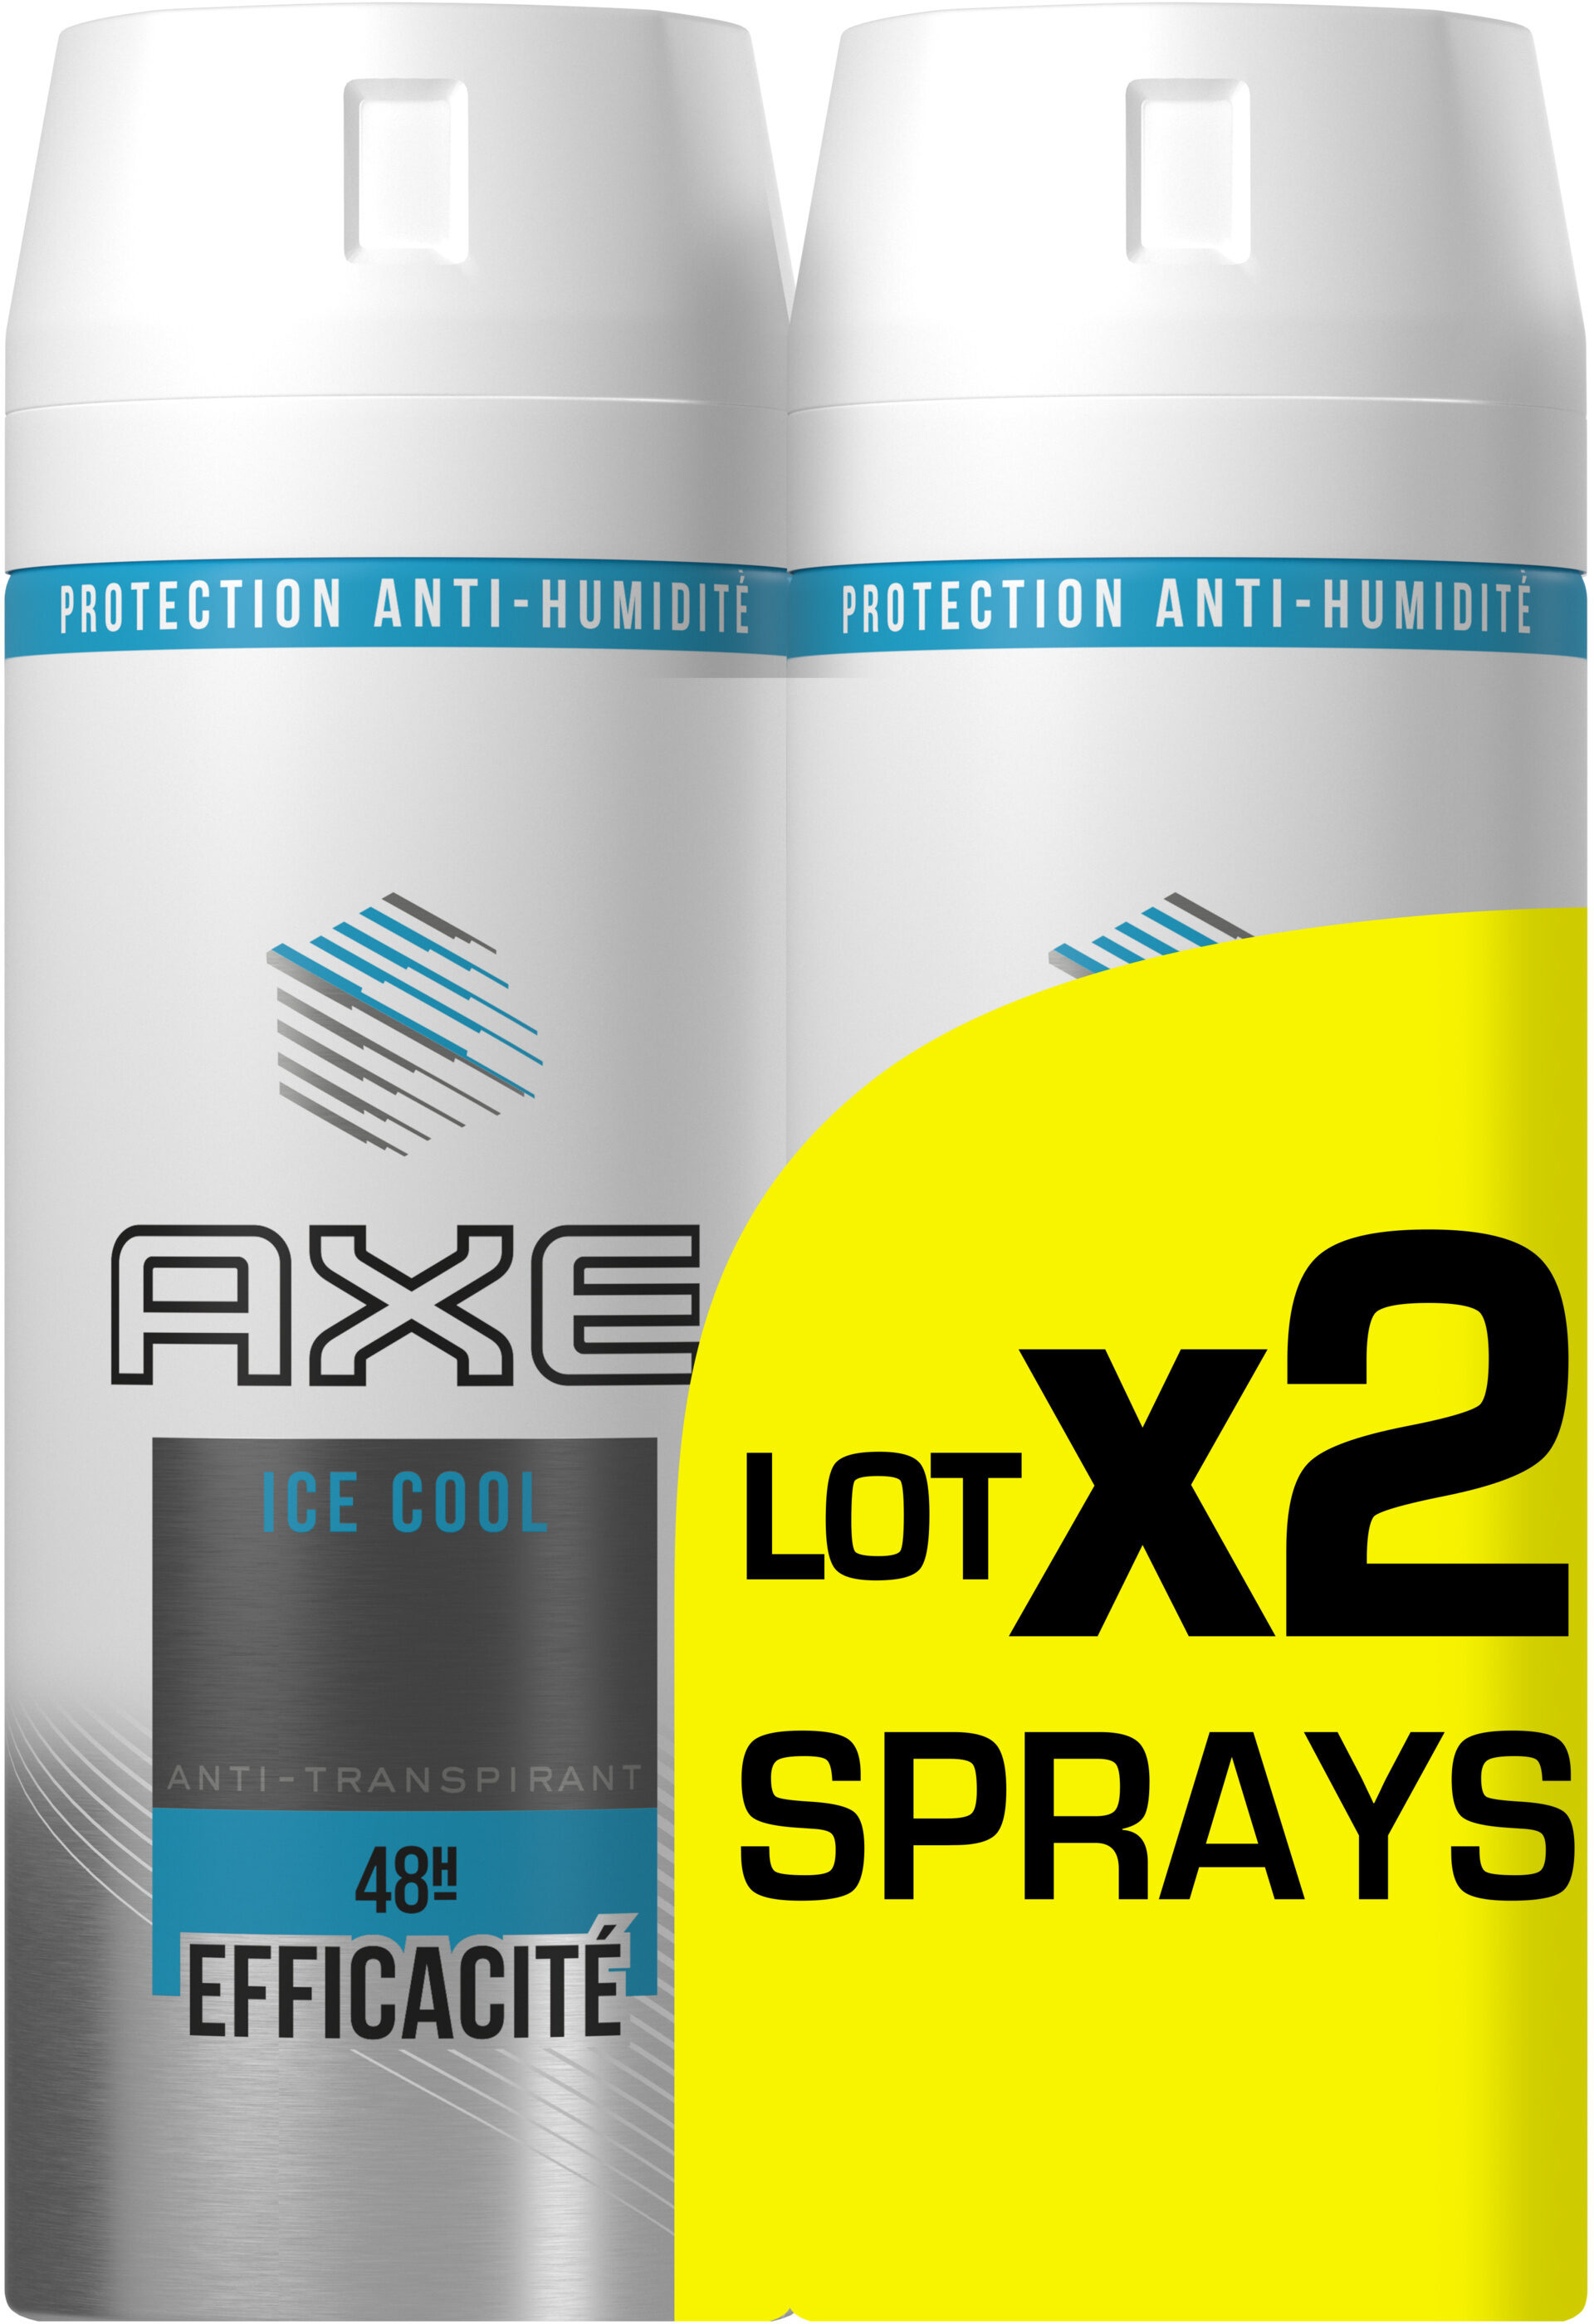 AXE Ice Cool Déodorant Homme Anti Transpirant Homme Menthe Glaciale & Citron Spray Lot 2x150ml - Product - fr